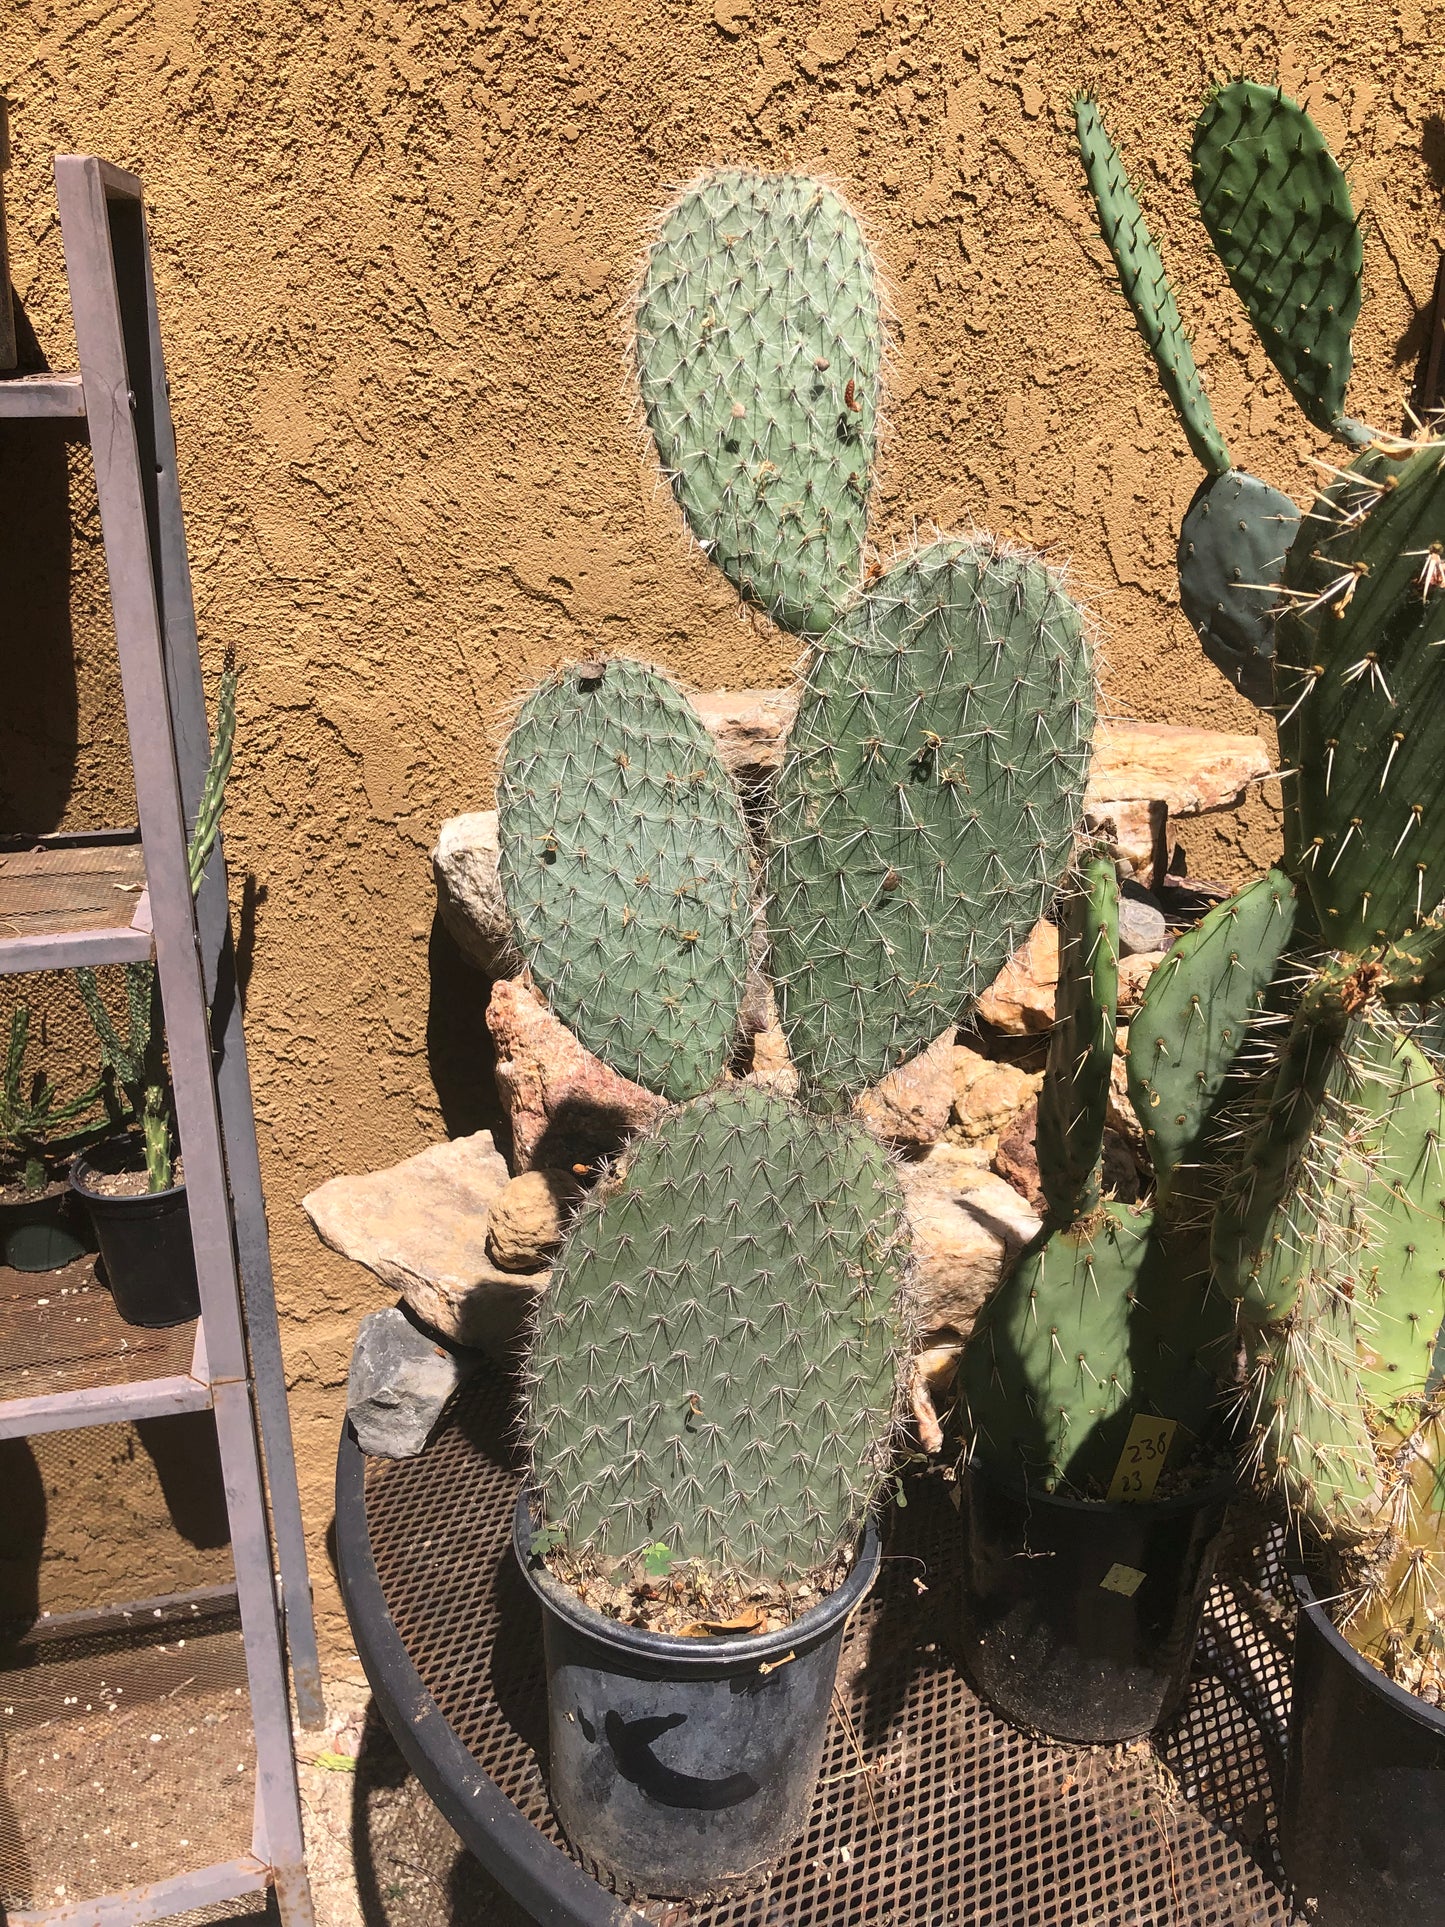 Opuntia engelmannii "White Thorned Prickly Pear" 24"Tall 10" Wide #241B